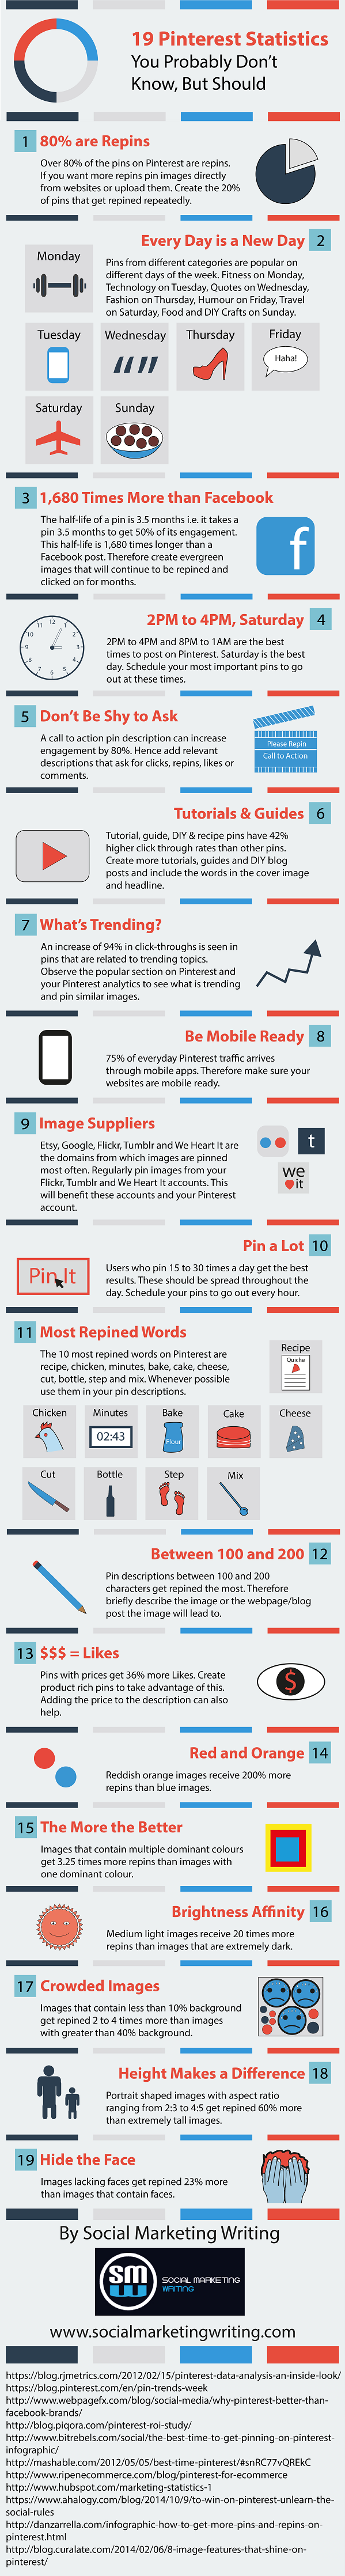 19 Pinterest Statistics You Probably Don’t Know, But Should [Infographic]